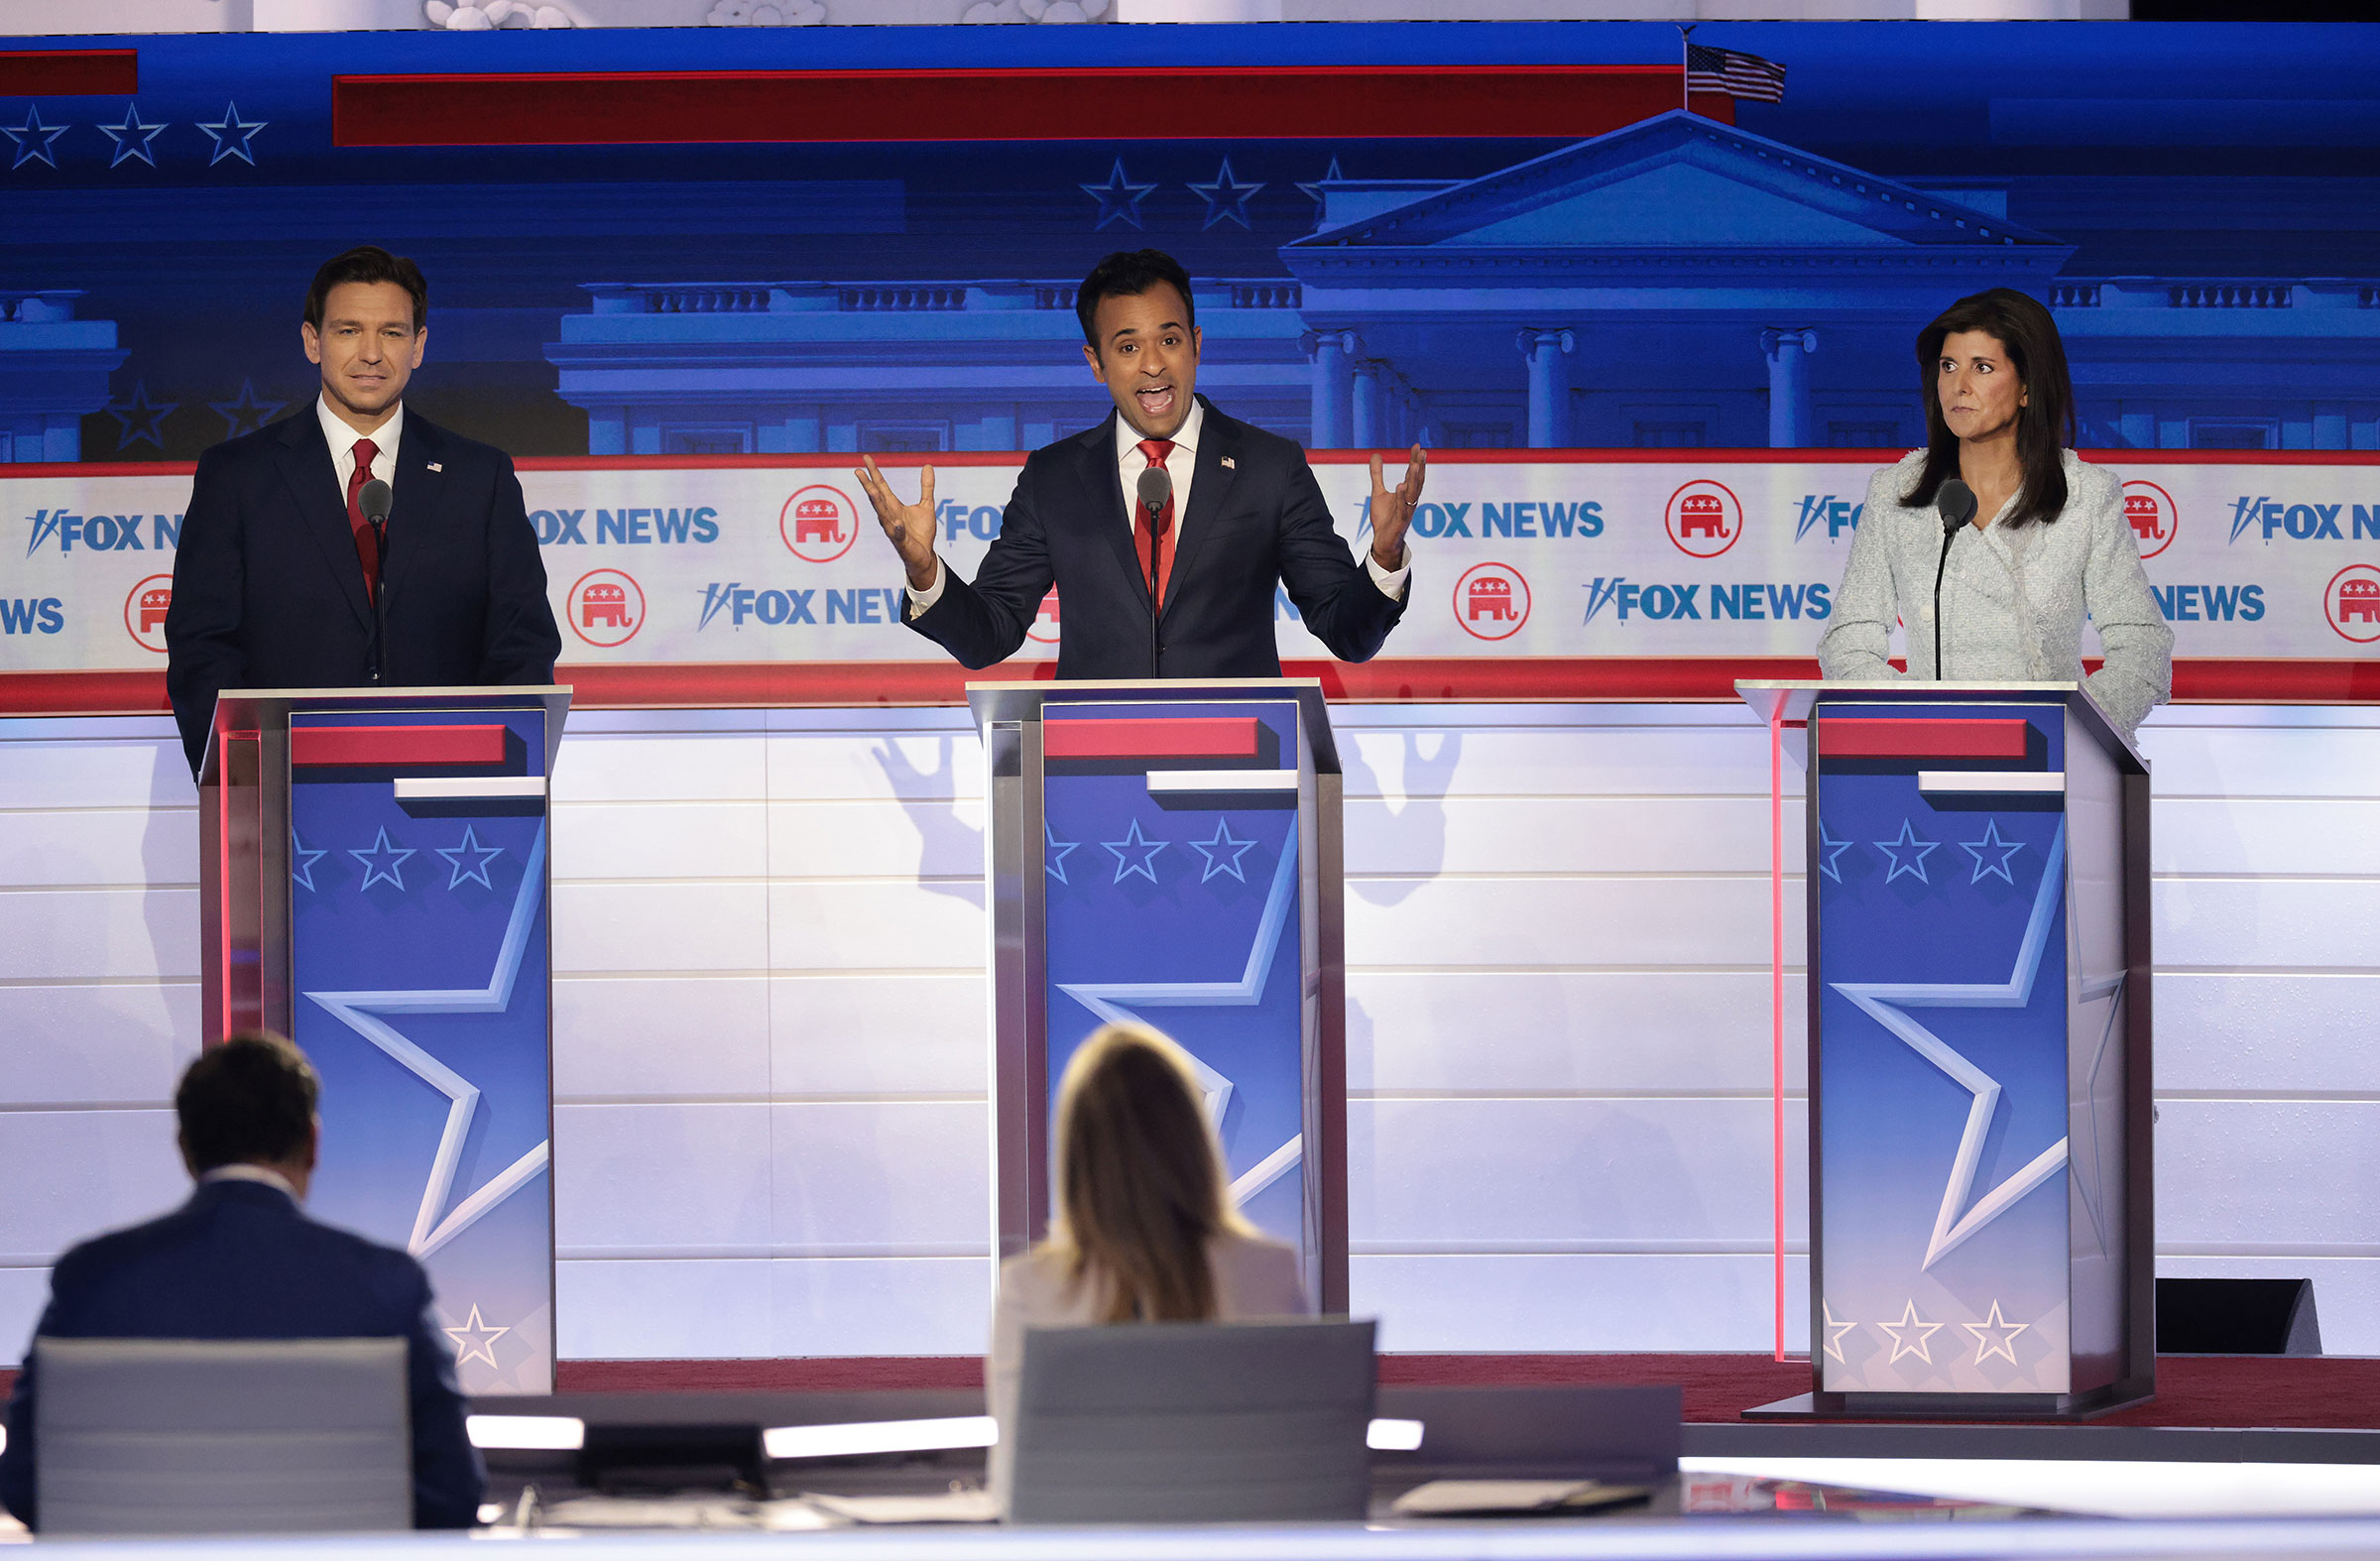 Republican presidential candidates Florida Gov. Ron DeSantis, Vivek Ramaswamy and former U.N. Ambassador Nikki Haley participate in the first debate of the GOP primary season in Milwaukee, on Aug. 23, 2023.